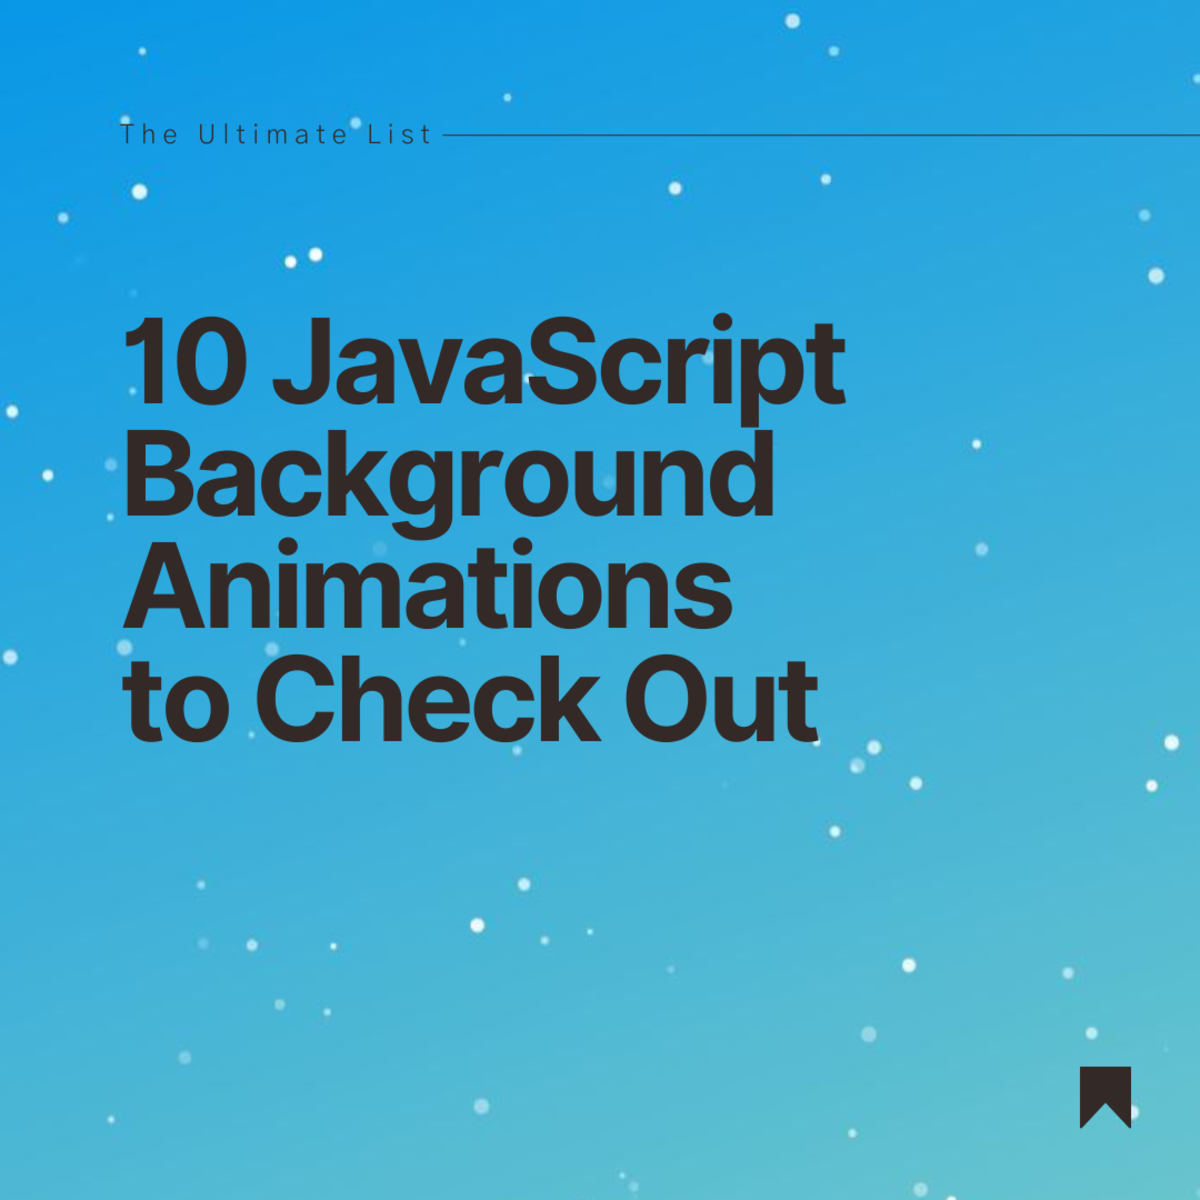 10 JavaScript Background Animations You Can Quickly Add to Your Site